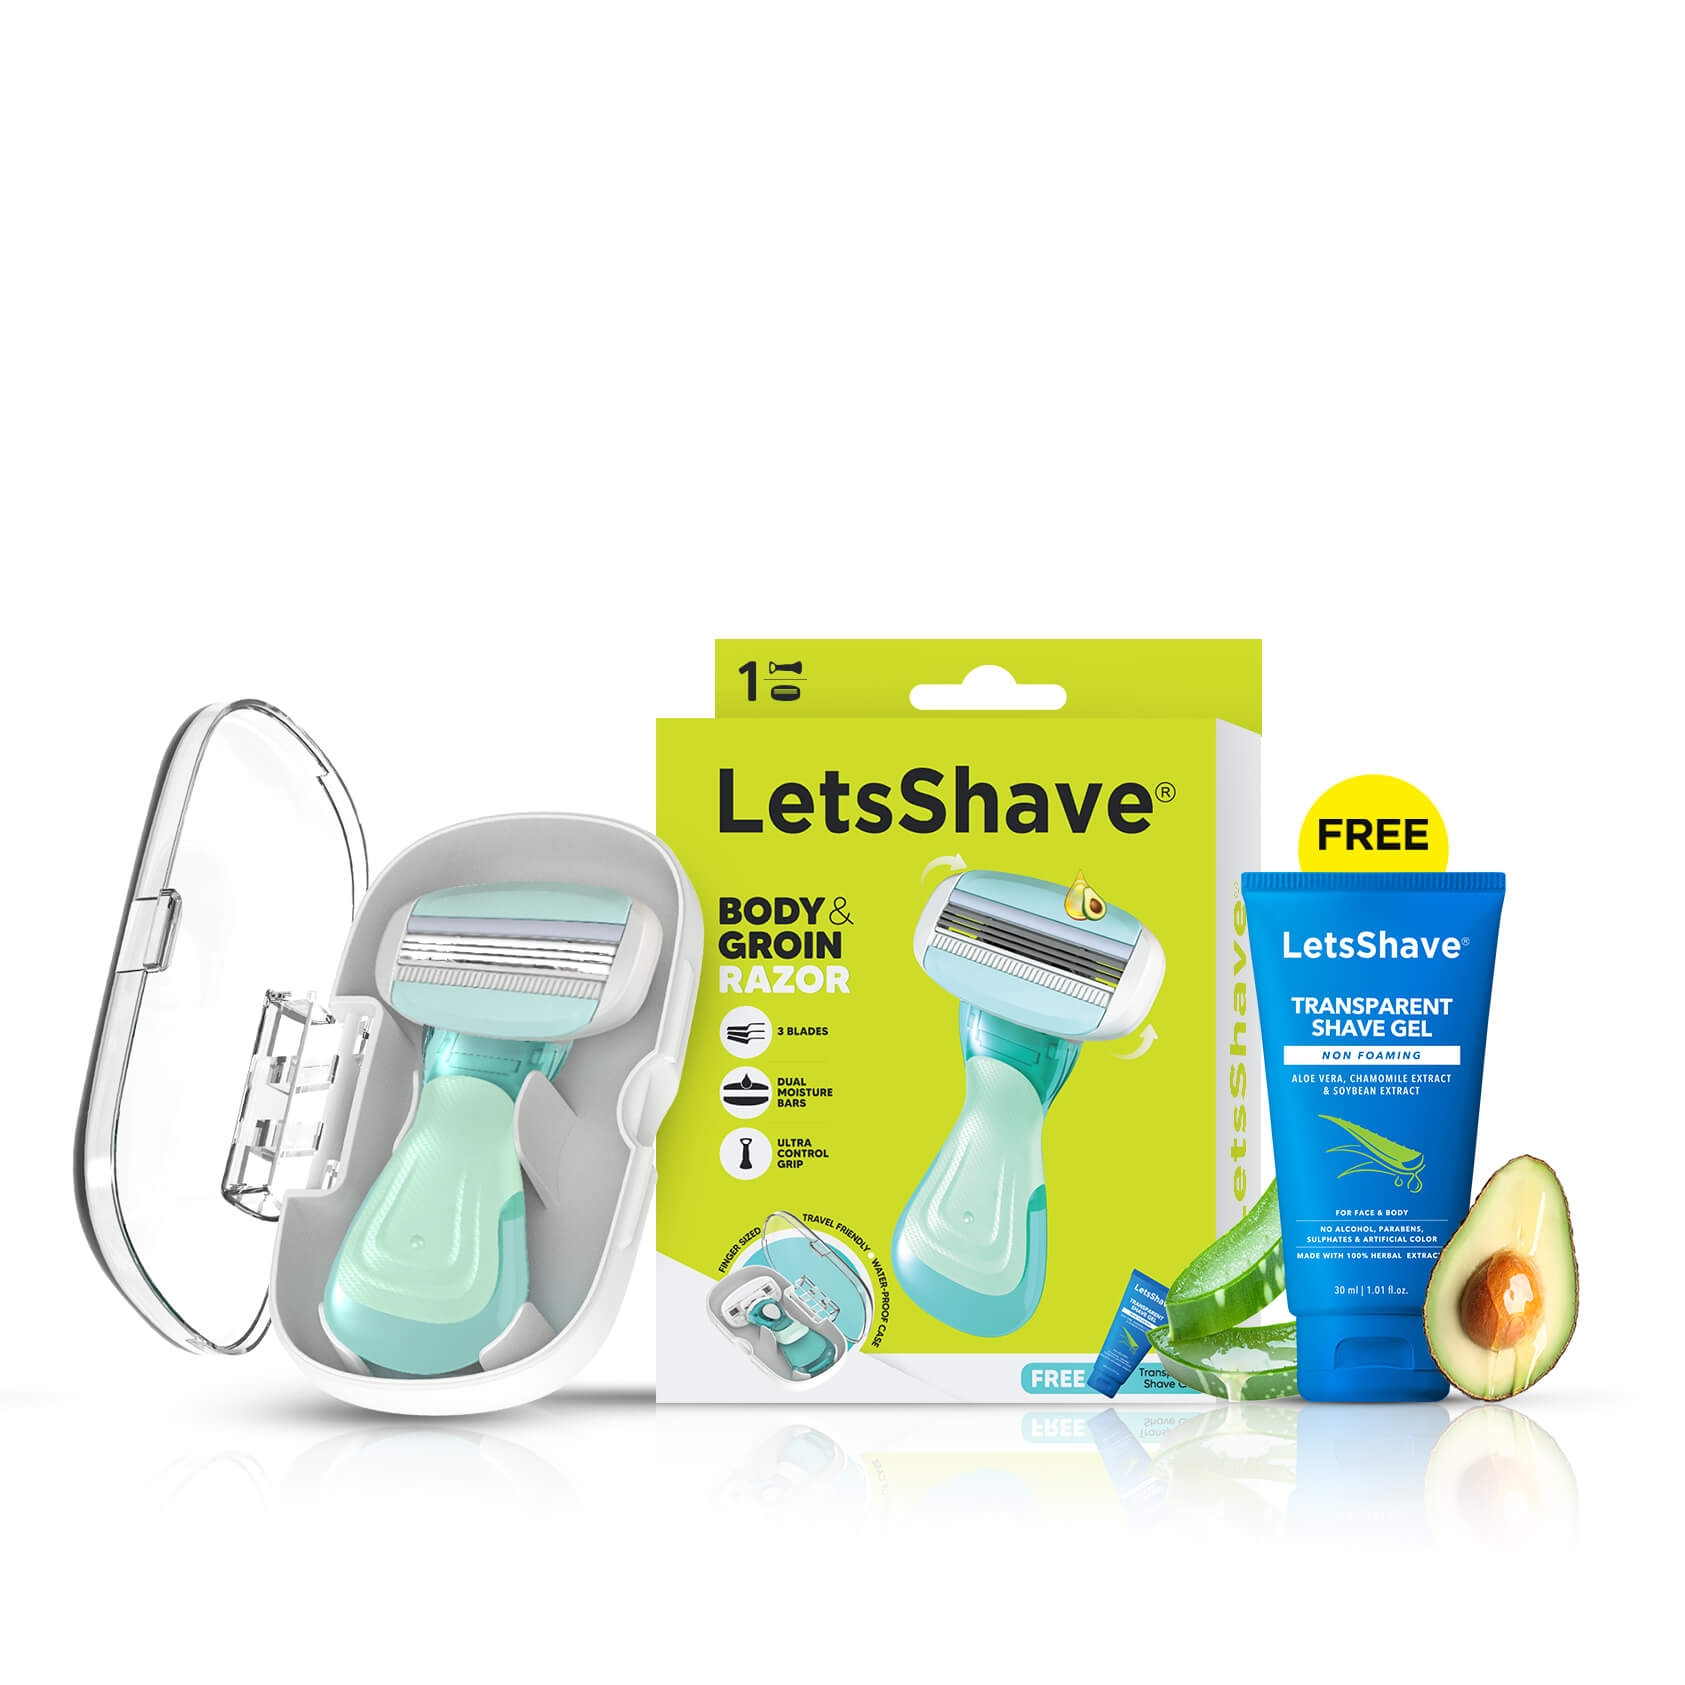 LetsShave | LetsShave Body and Groin Razor for Men with free Transparent Shave Gel | 3 Blade painless Groin and Body Hair Remover with Dual Moisture Bars | Compact Razor with Clamshell Travel Case